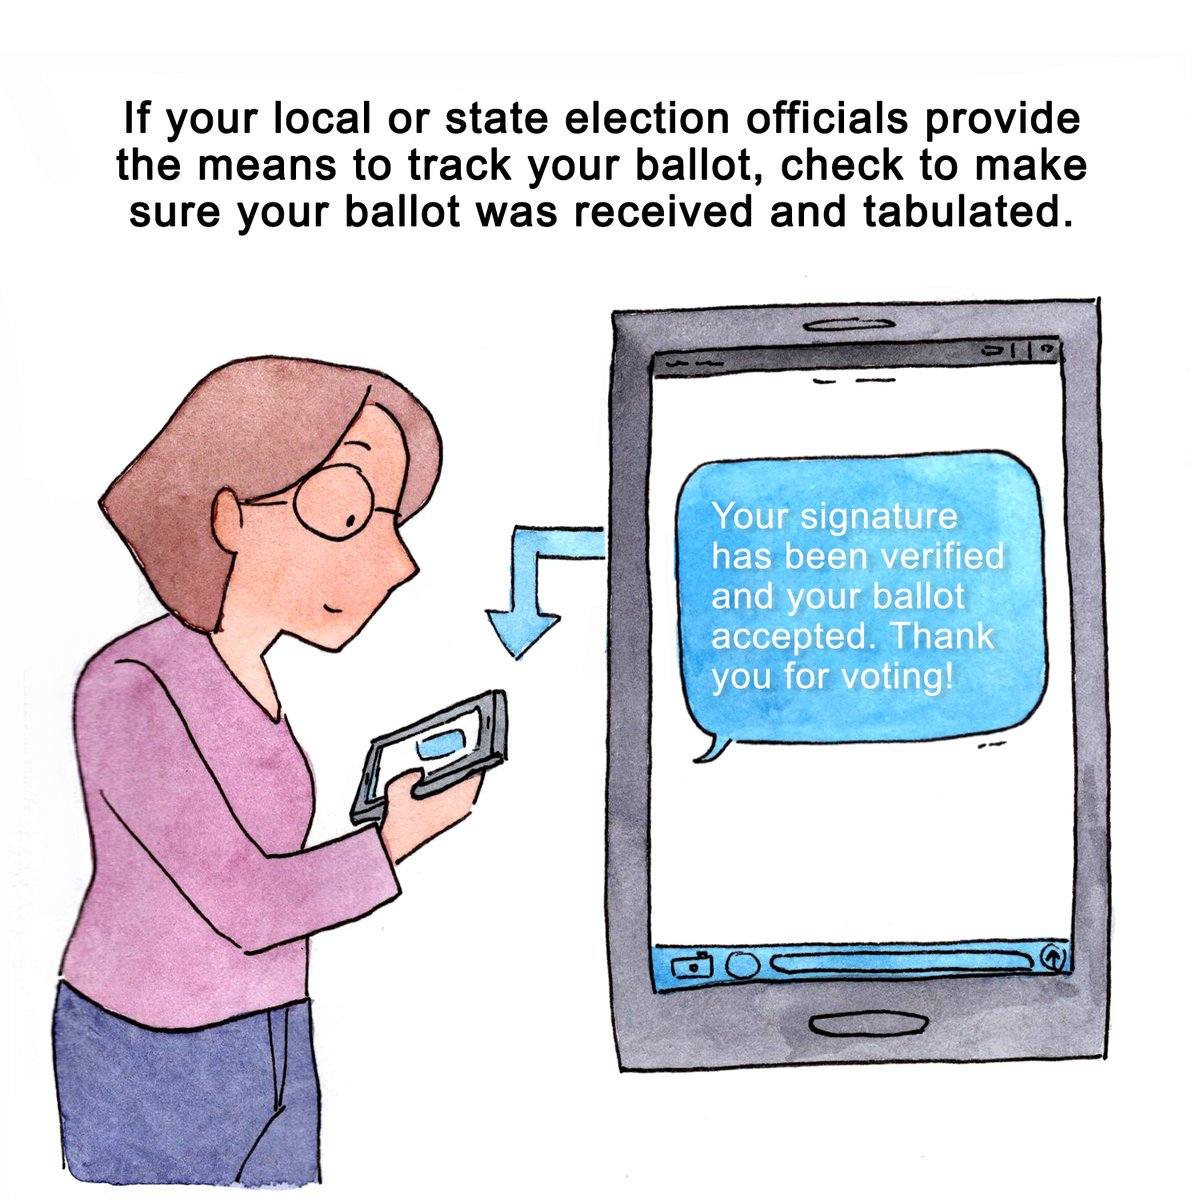  If your local or state election officials provide the means to track your ballot, check to make sure your ballotwas received and tabulated.(9/10)